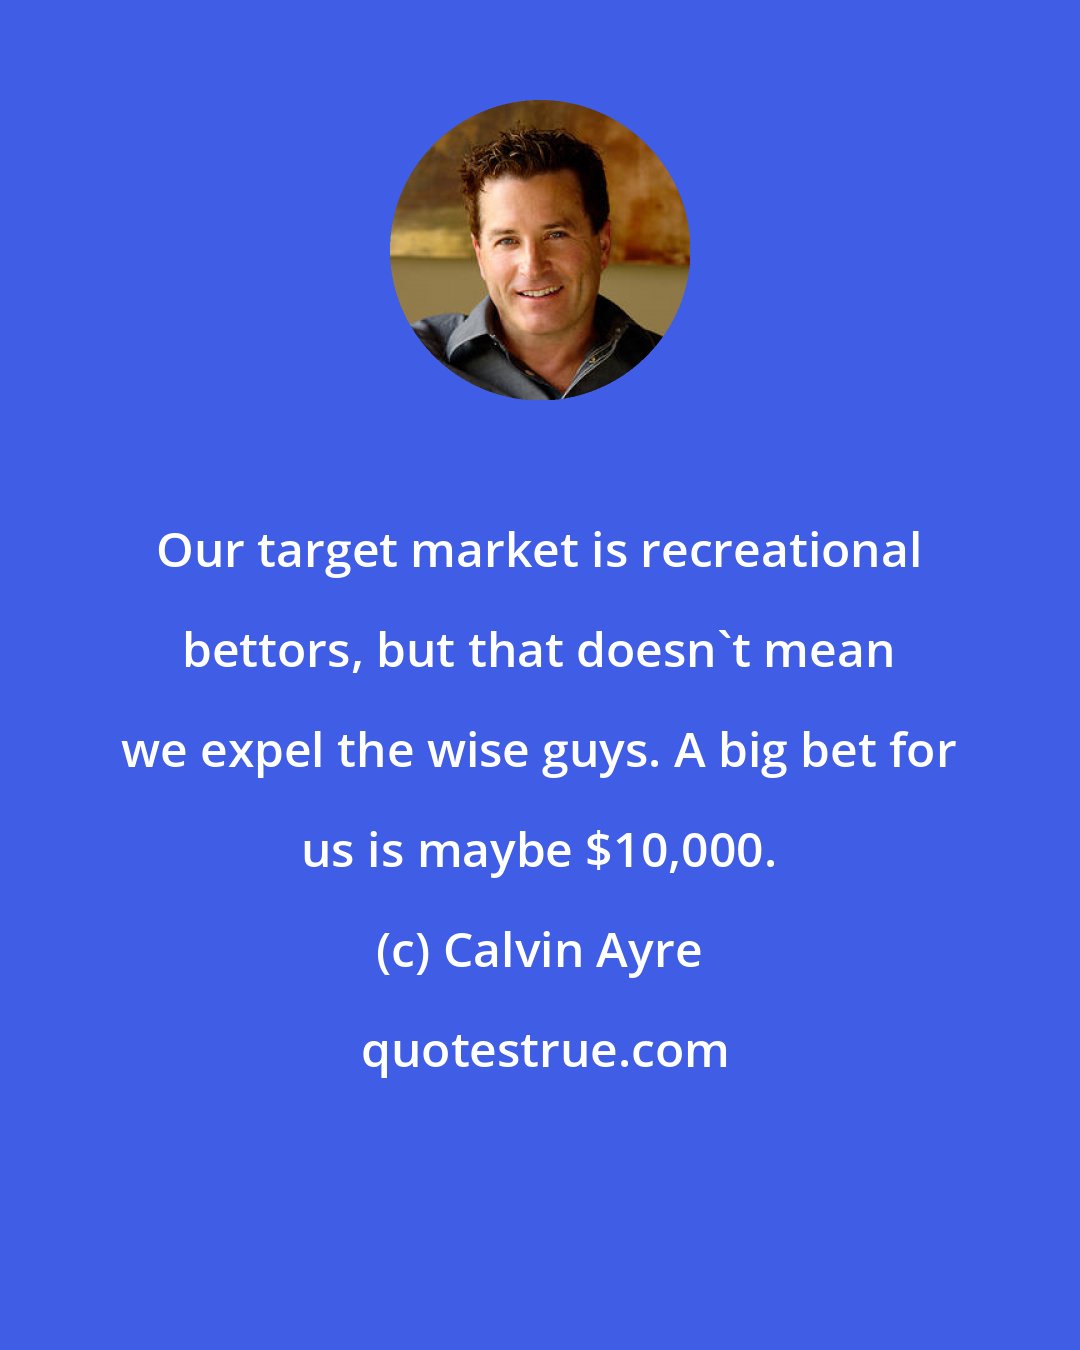 Calvin Ayre: Our target market is recreational bettors, but that doesn't mean we expel the wise guys. A big bet for us is maybe $10,000.